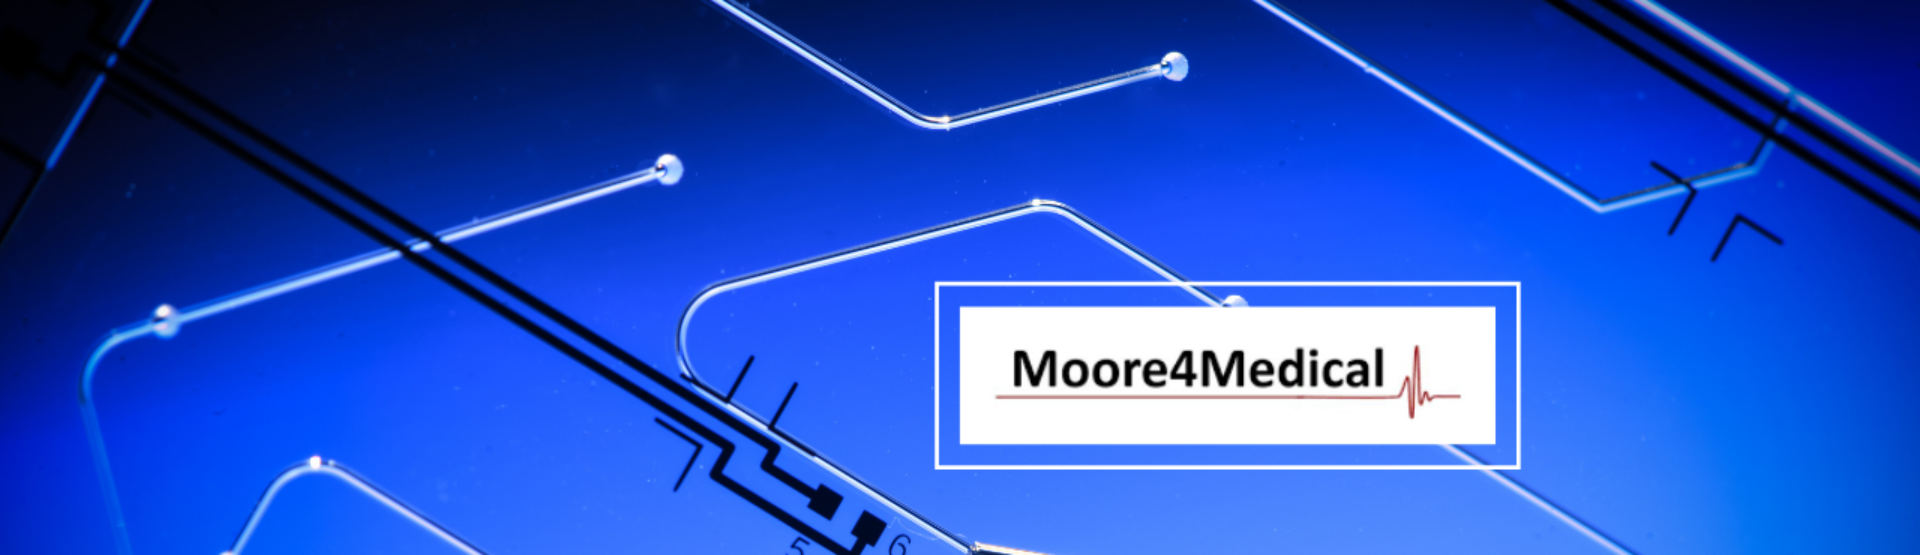 logo moore4medical research project